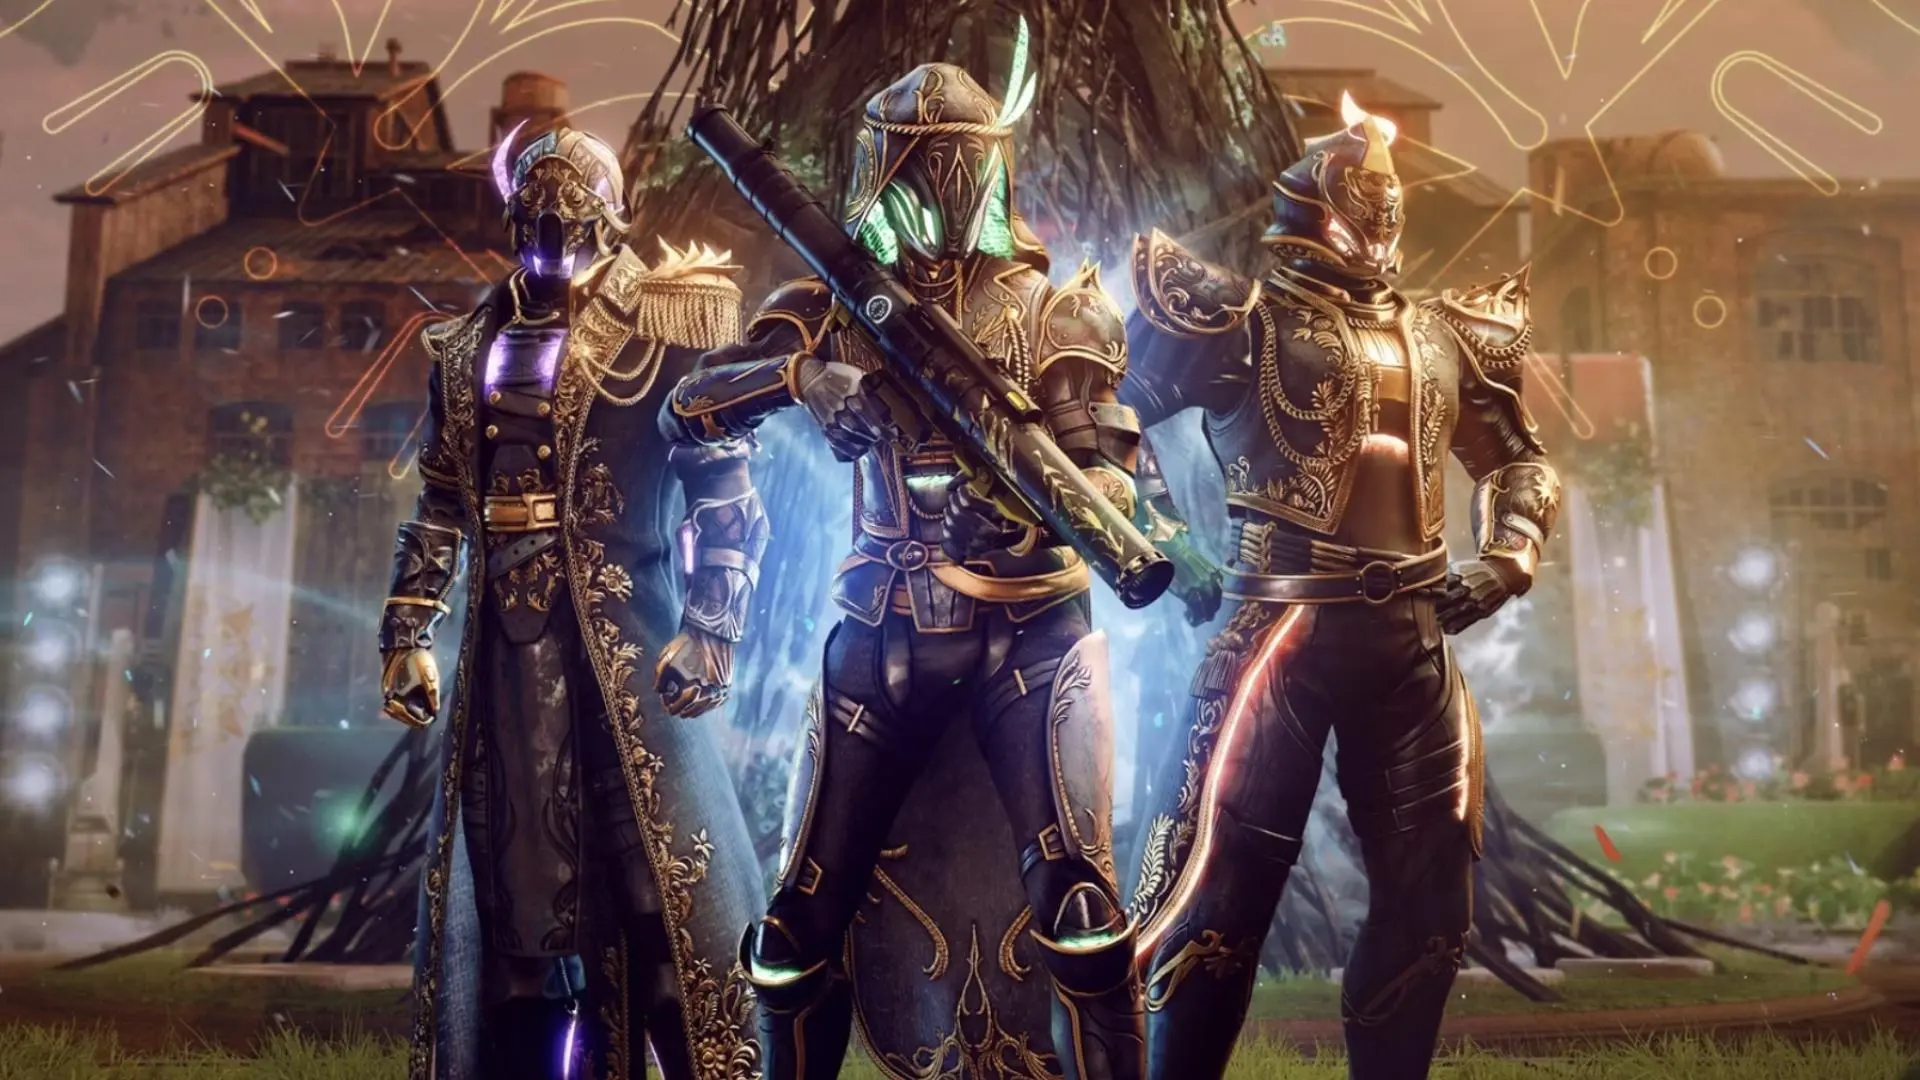 Key art for the Destiny 2 Solstice event shows three Guardians triumphantly posing, with a Warlock on the left, a Hunter in the middle, and a Titan on the right.